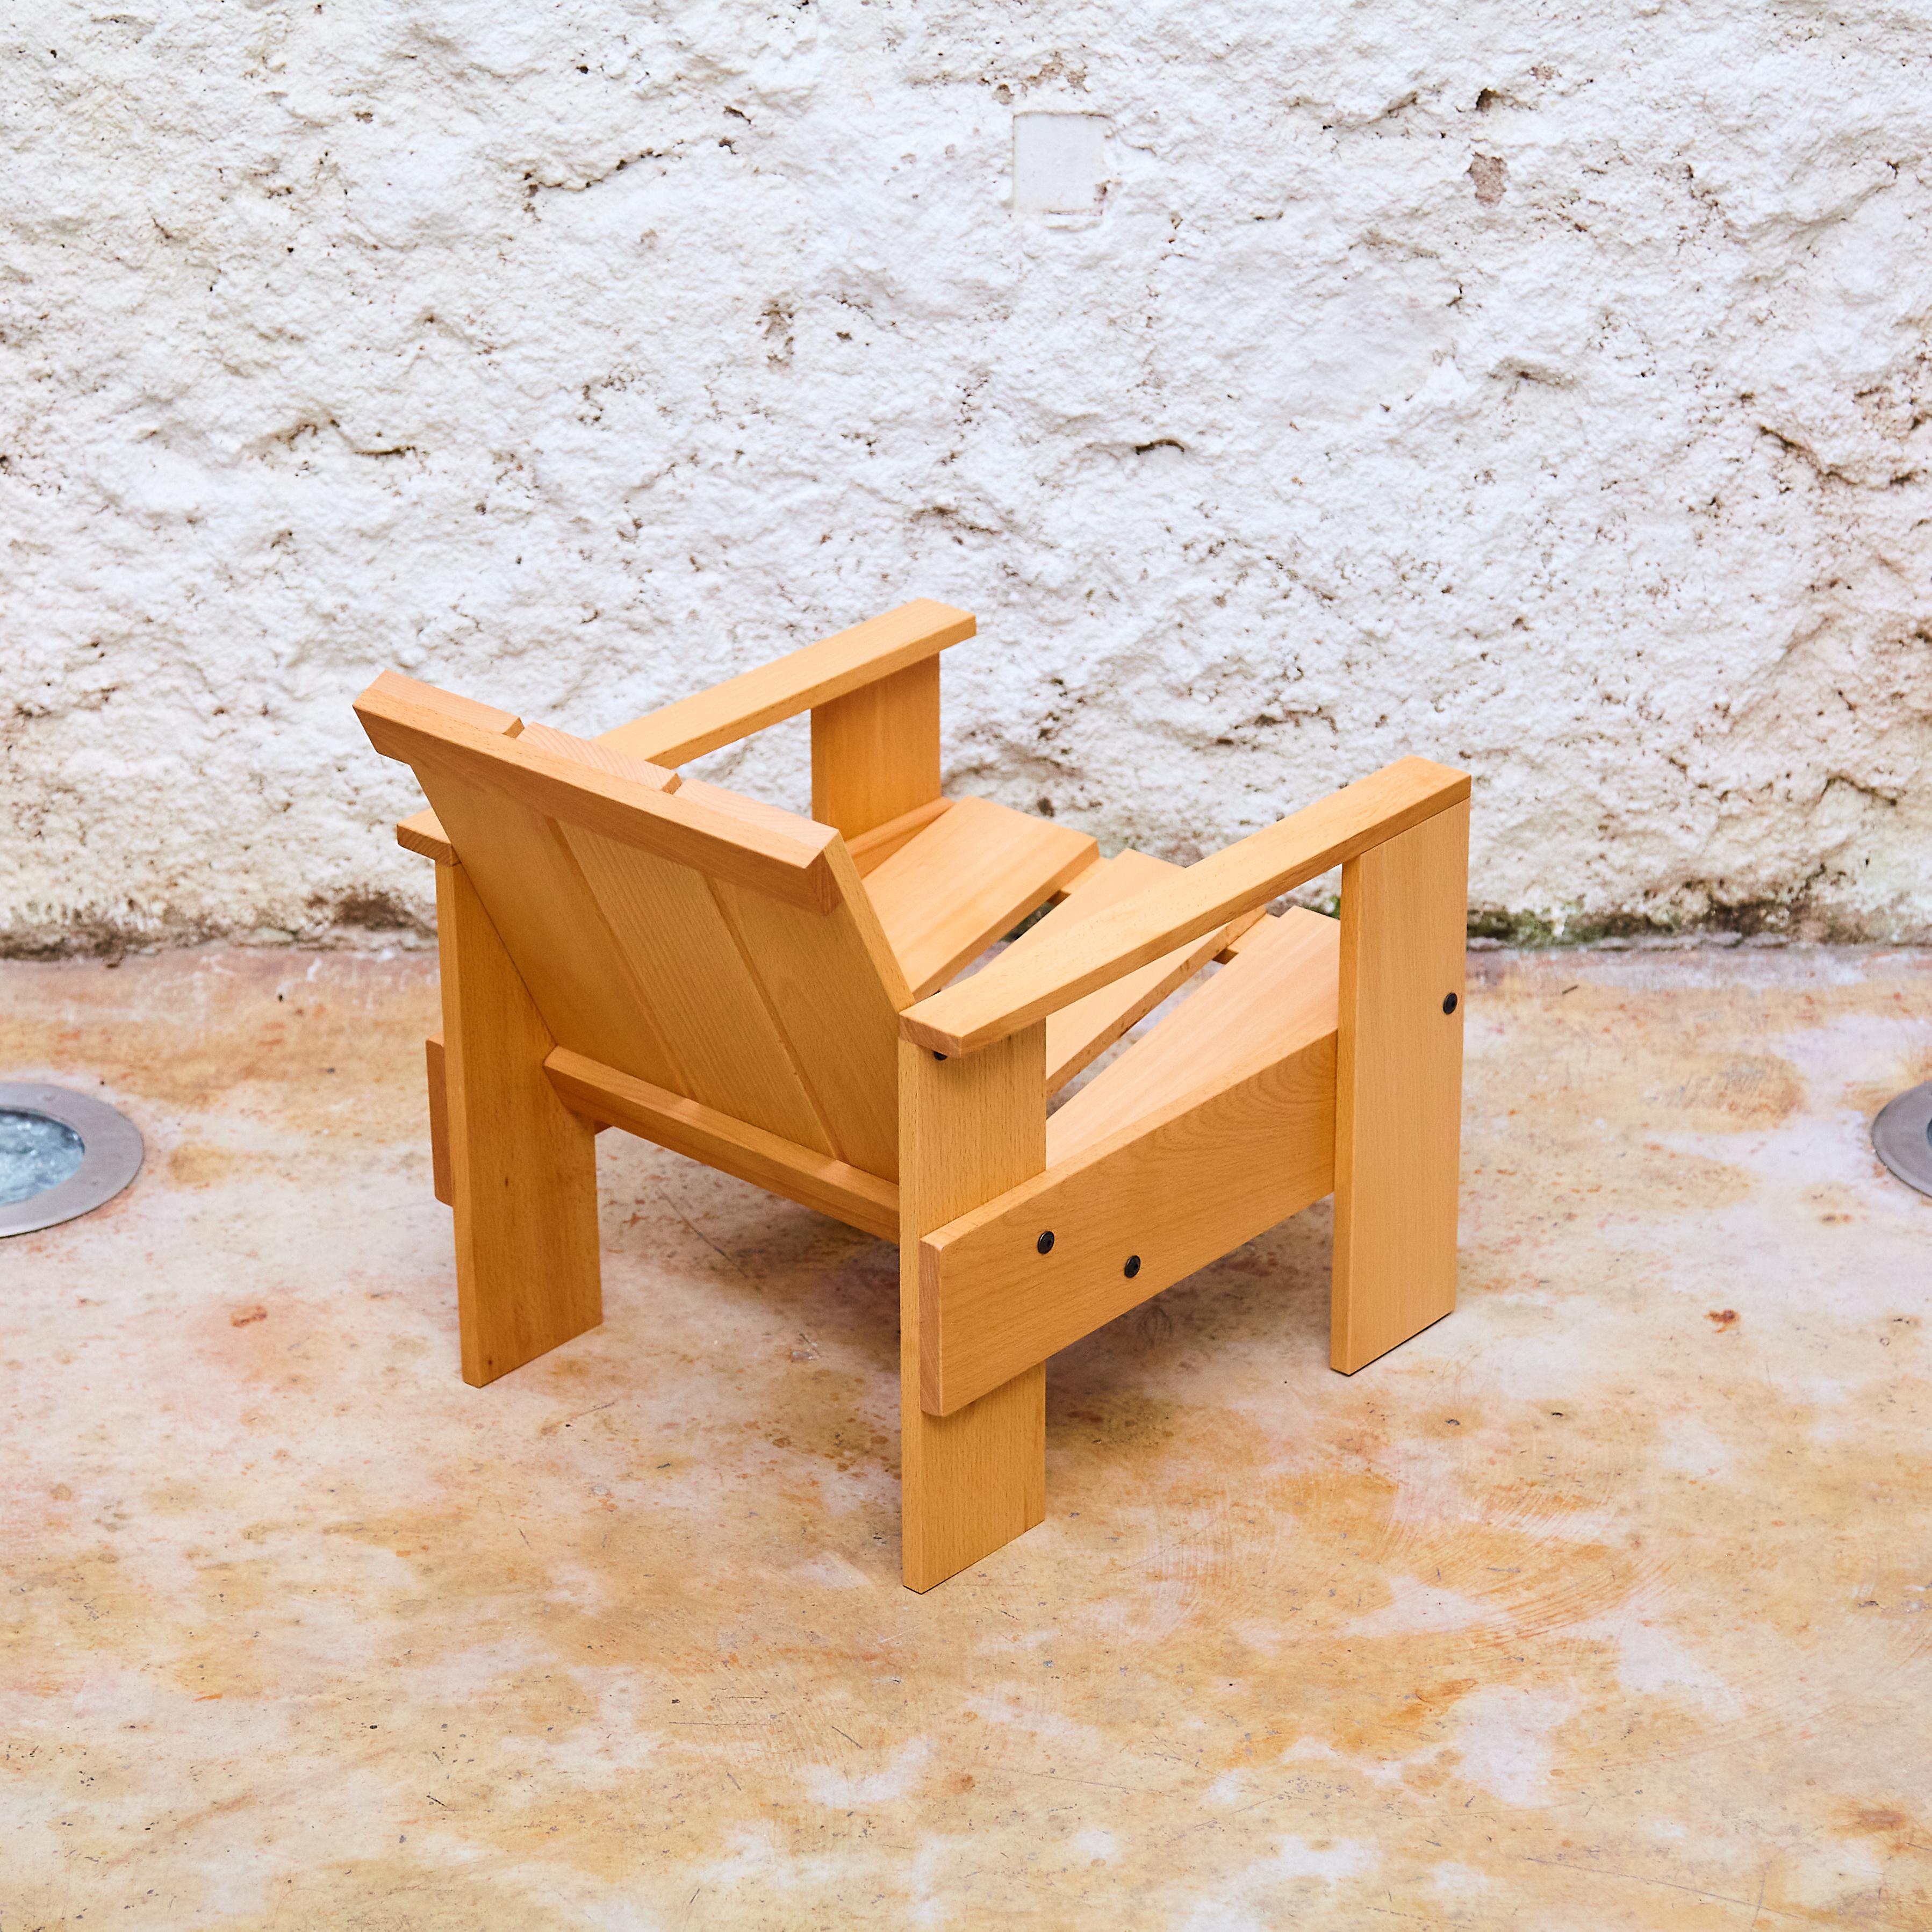 Gerrit Rietveld Wood Child Armchair 'Crate' by Rietveld by Rietveld, circa 2005 In Good Condition For Sale In Barcelona, Barcelona